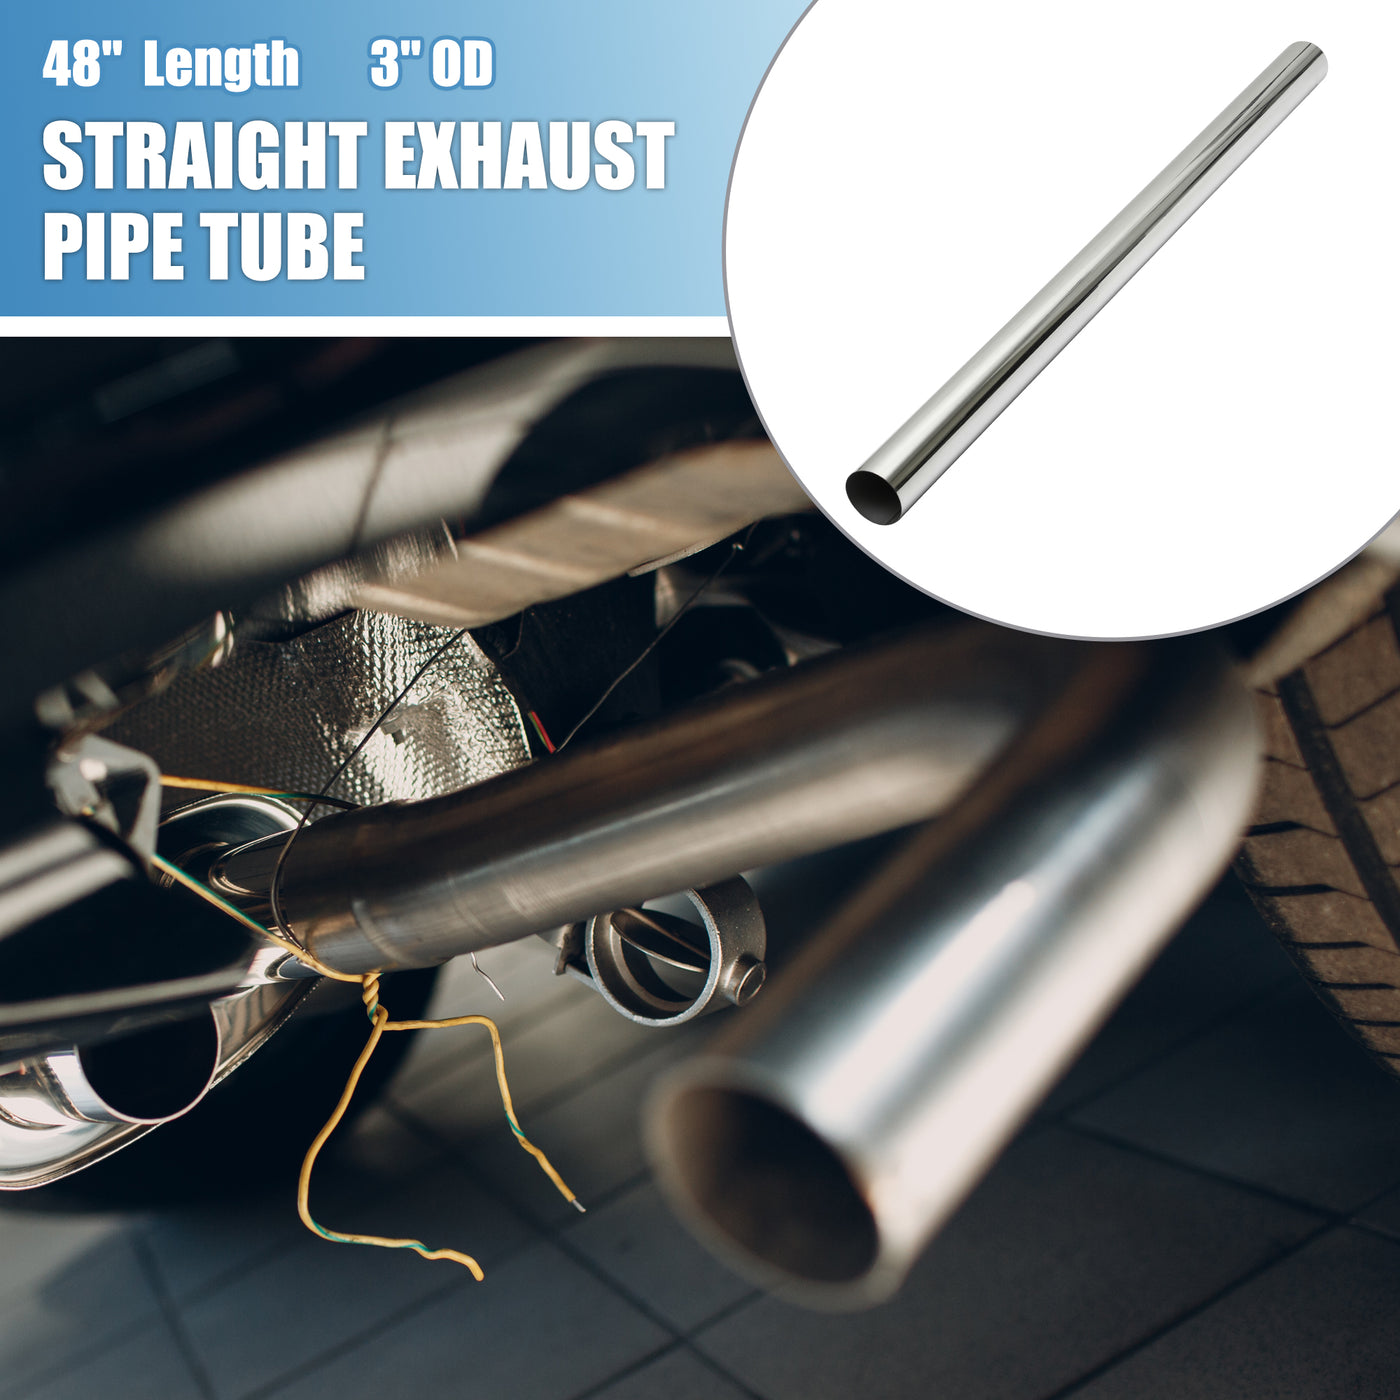 A ABSOPRO Car Mandrel Exhaust Pipe Tube Durable 48" Length 3'' OD Straight Exhaust Tube DIY Custom 0 Degree Modified Piping T304 Stainless Steel (Set of 2)